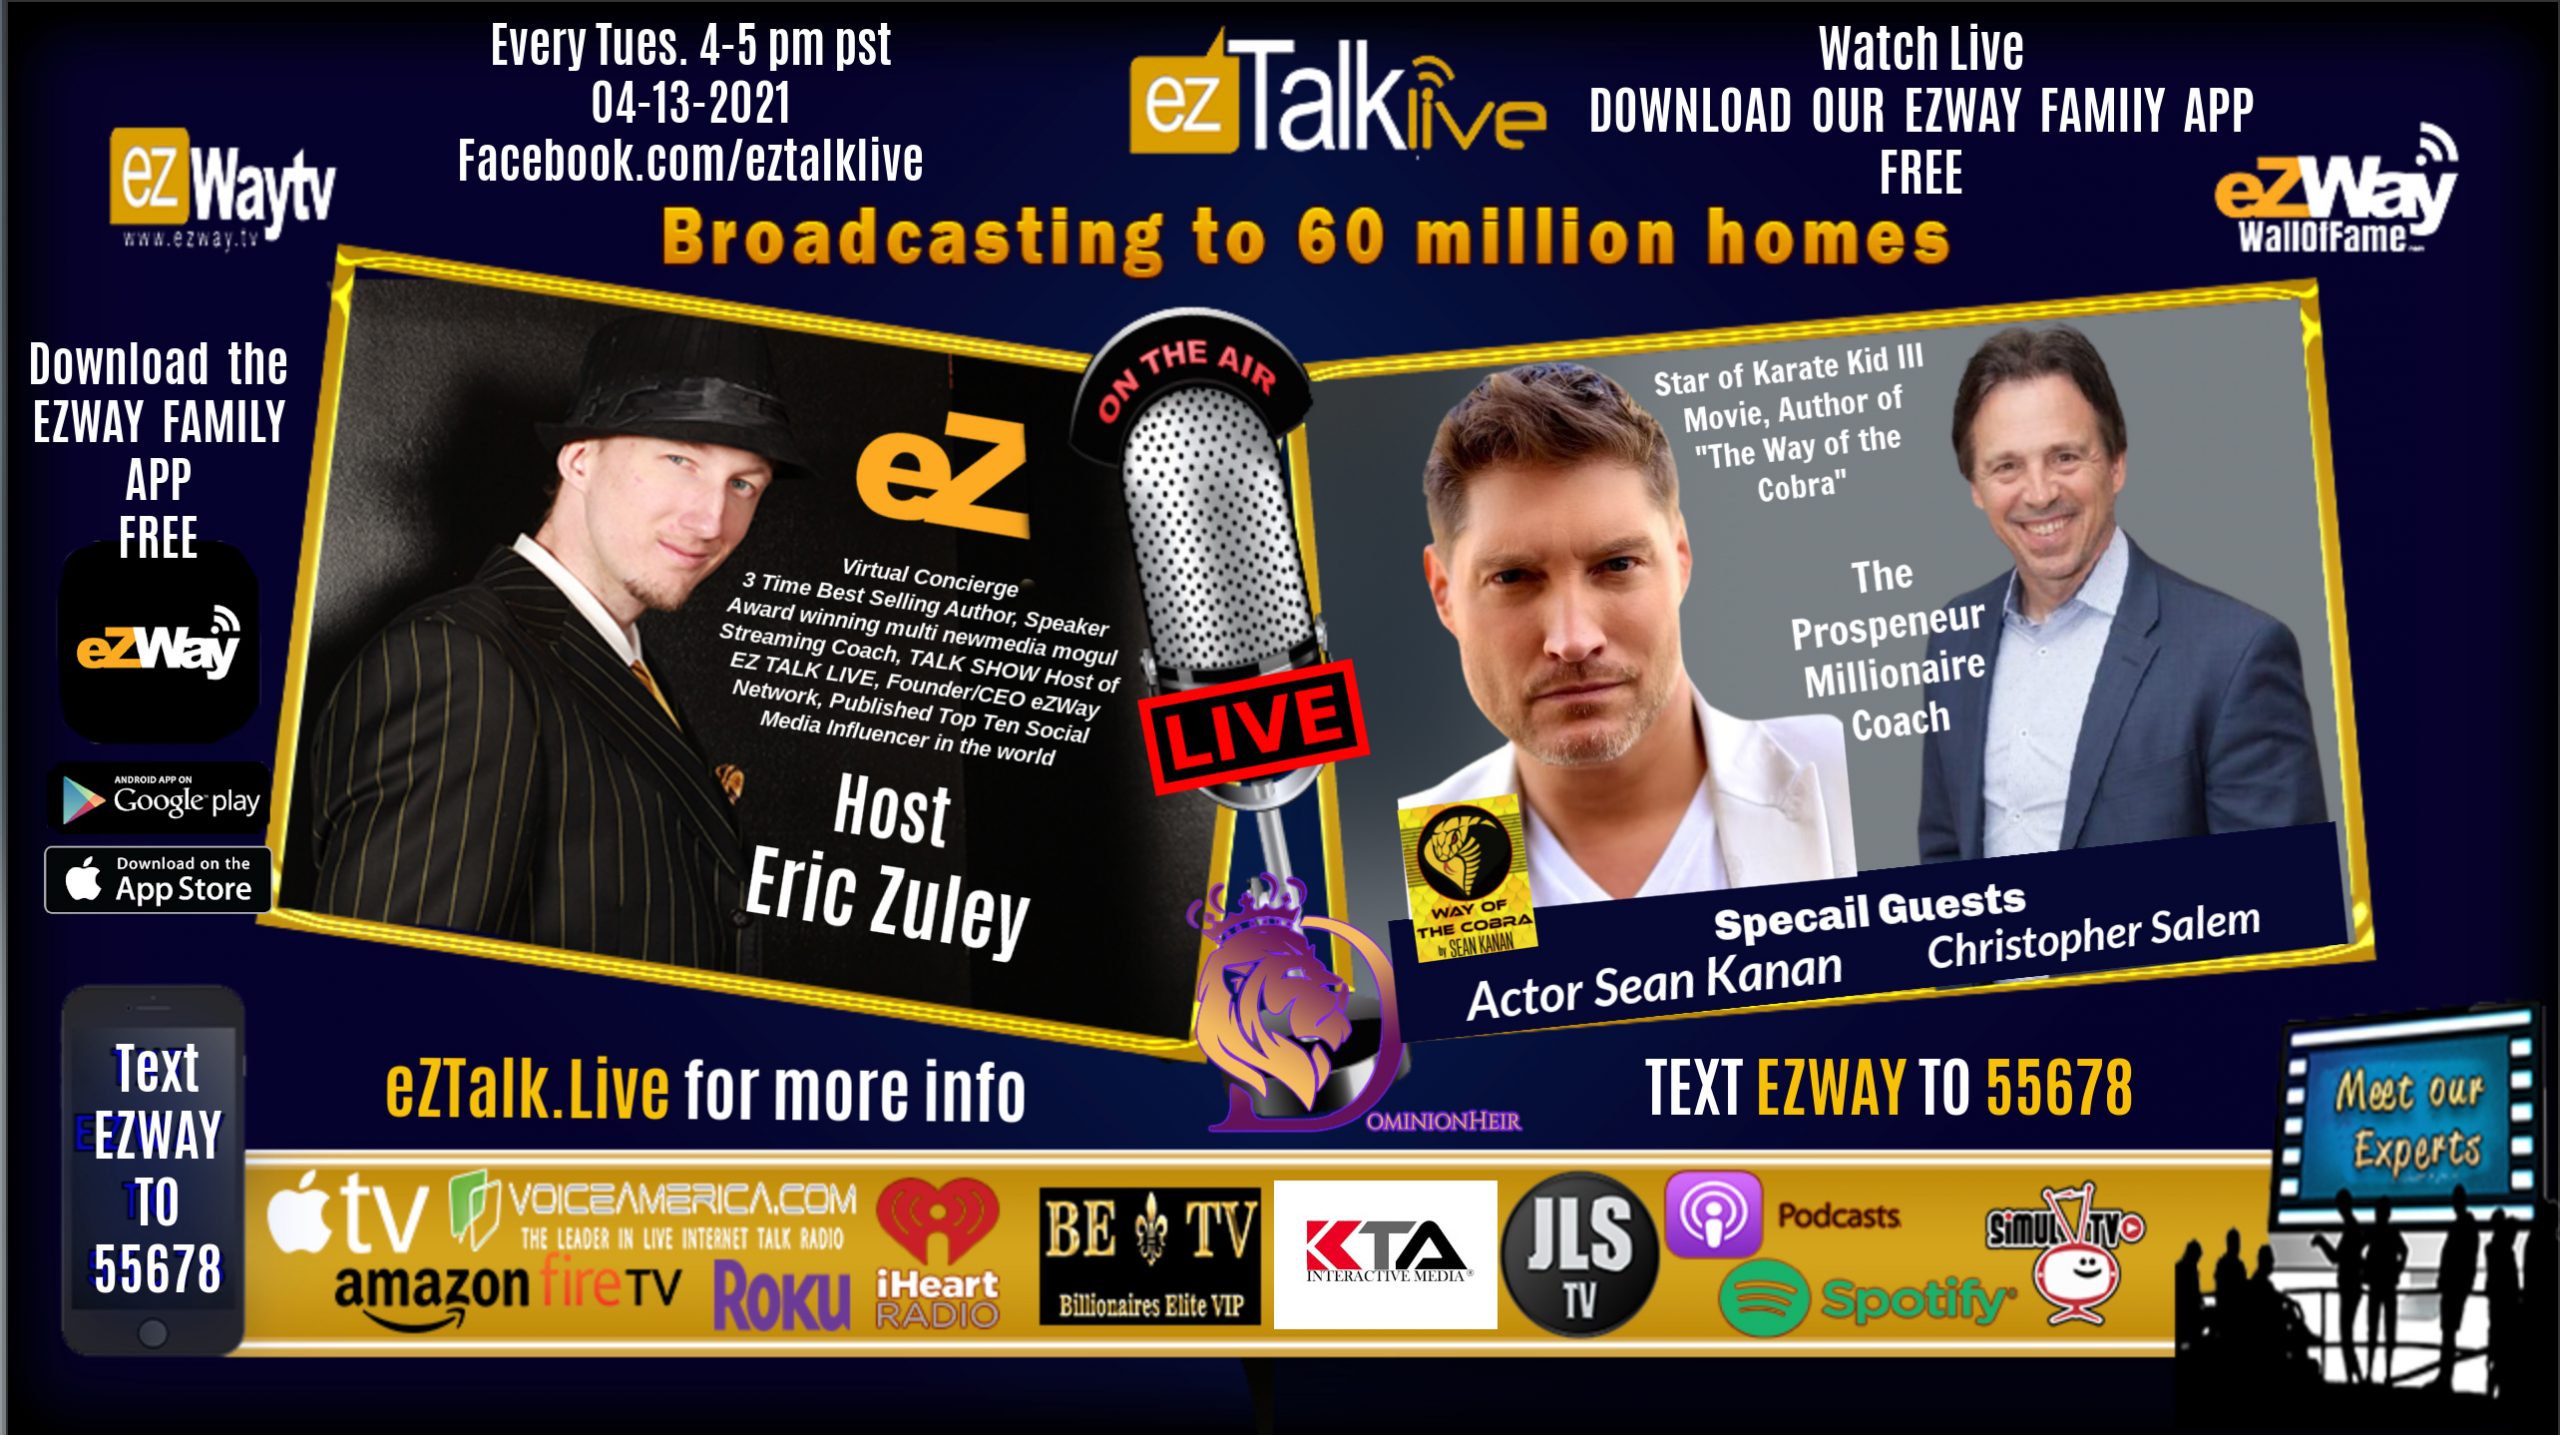 EZ TALK LIVE with Eric Zuley Feat. Sean Kanan and Christopher Salem